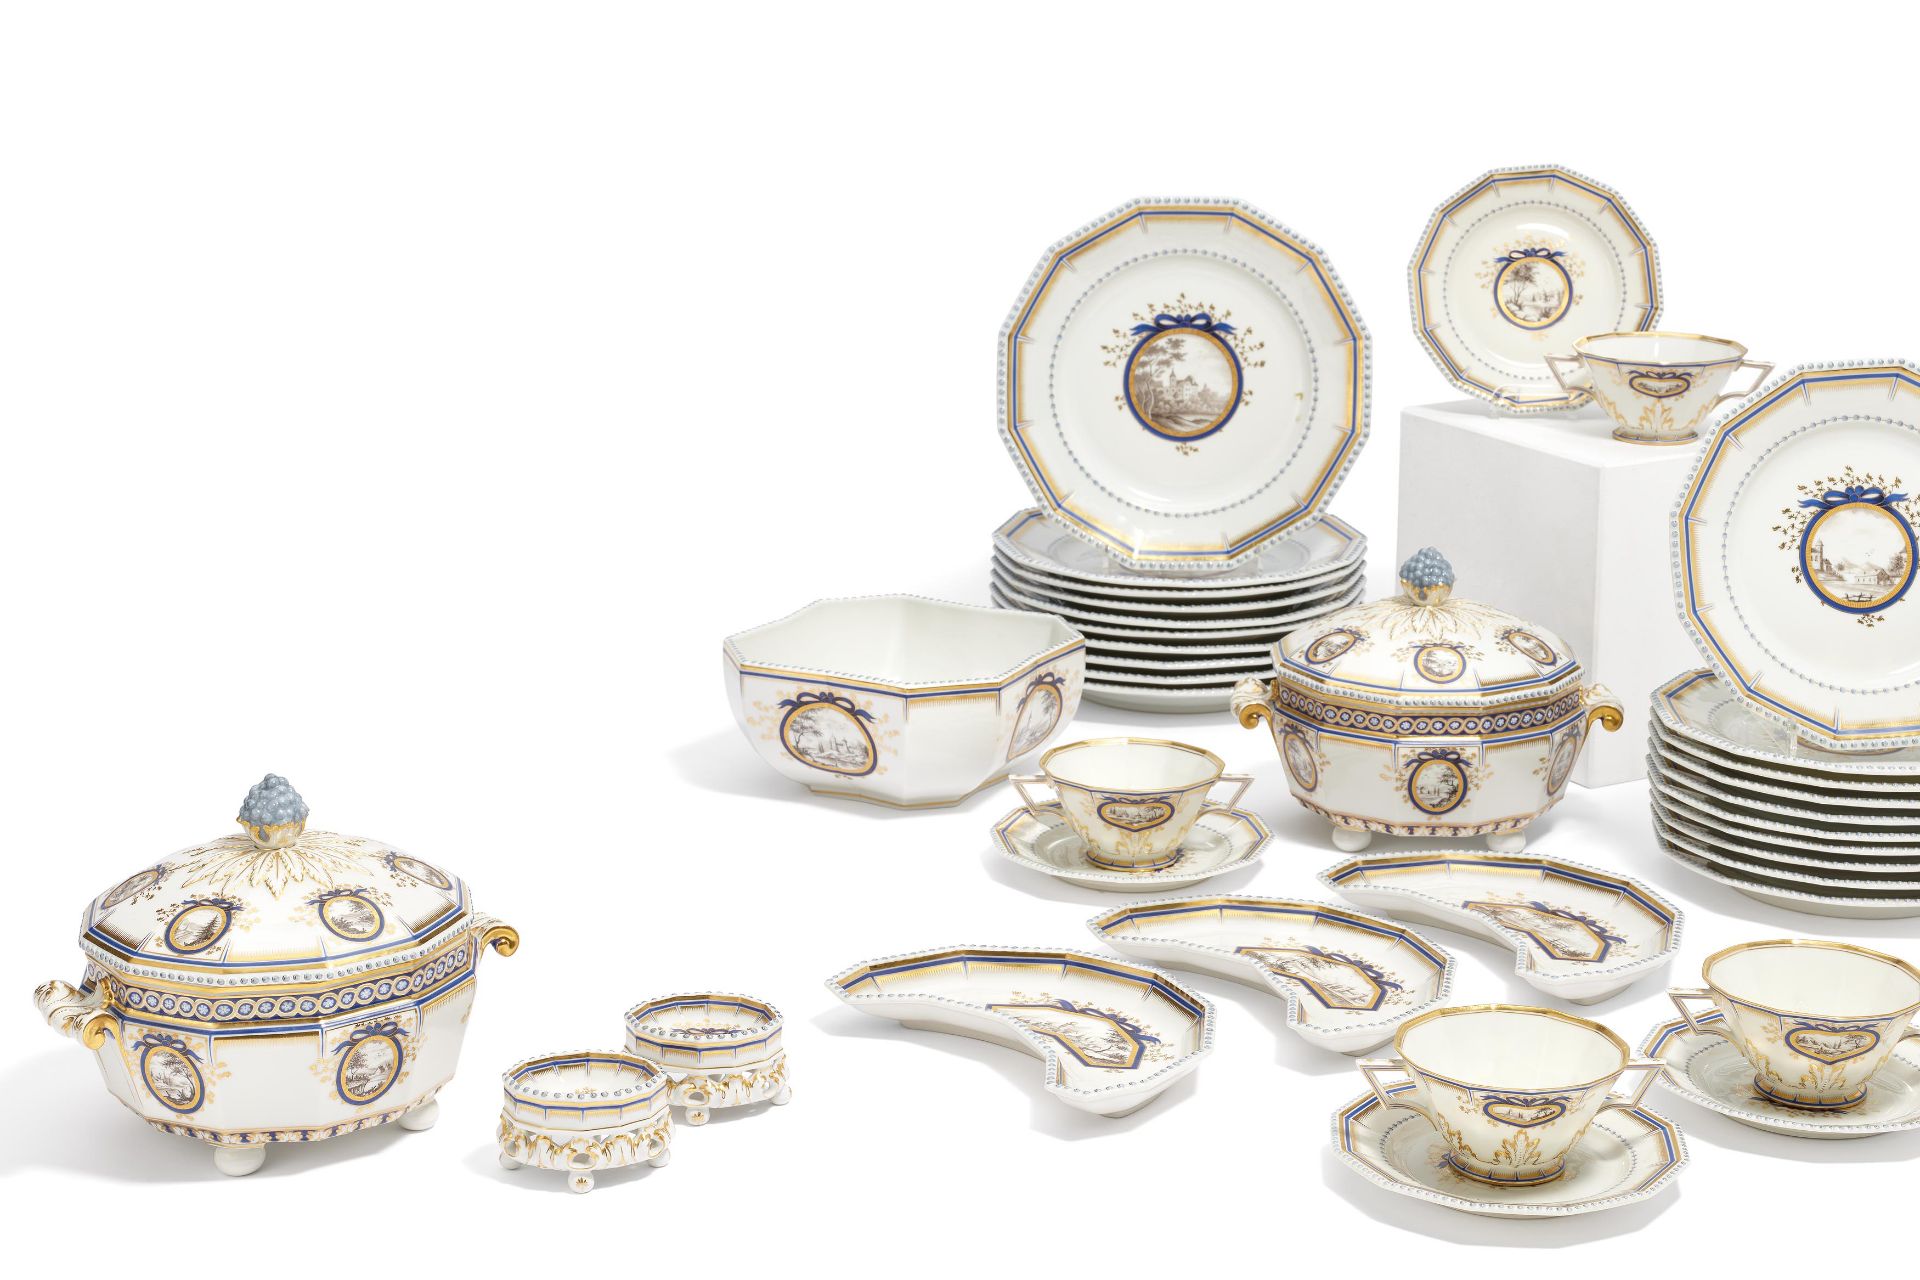 Nymphenburg: LARGE DINNER SERVICE 'ROYAL BAVARIAN' WITH 107 PIECES